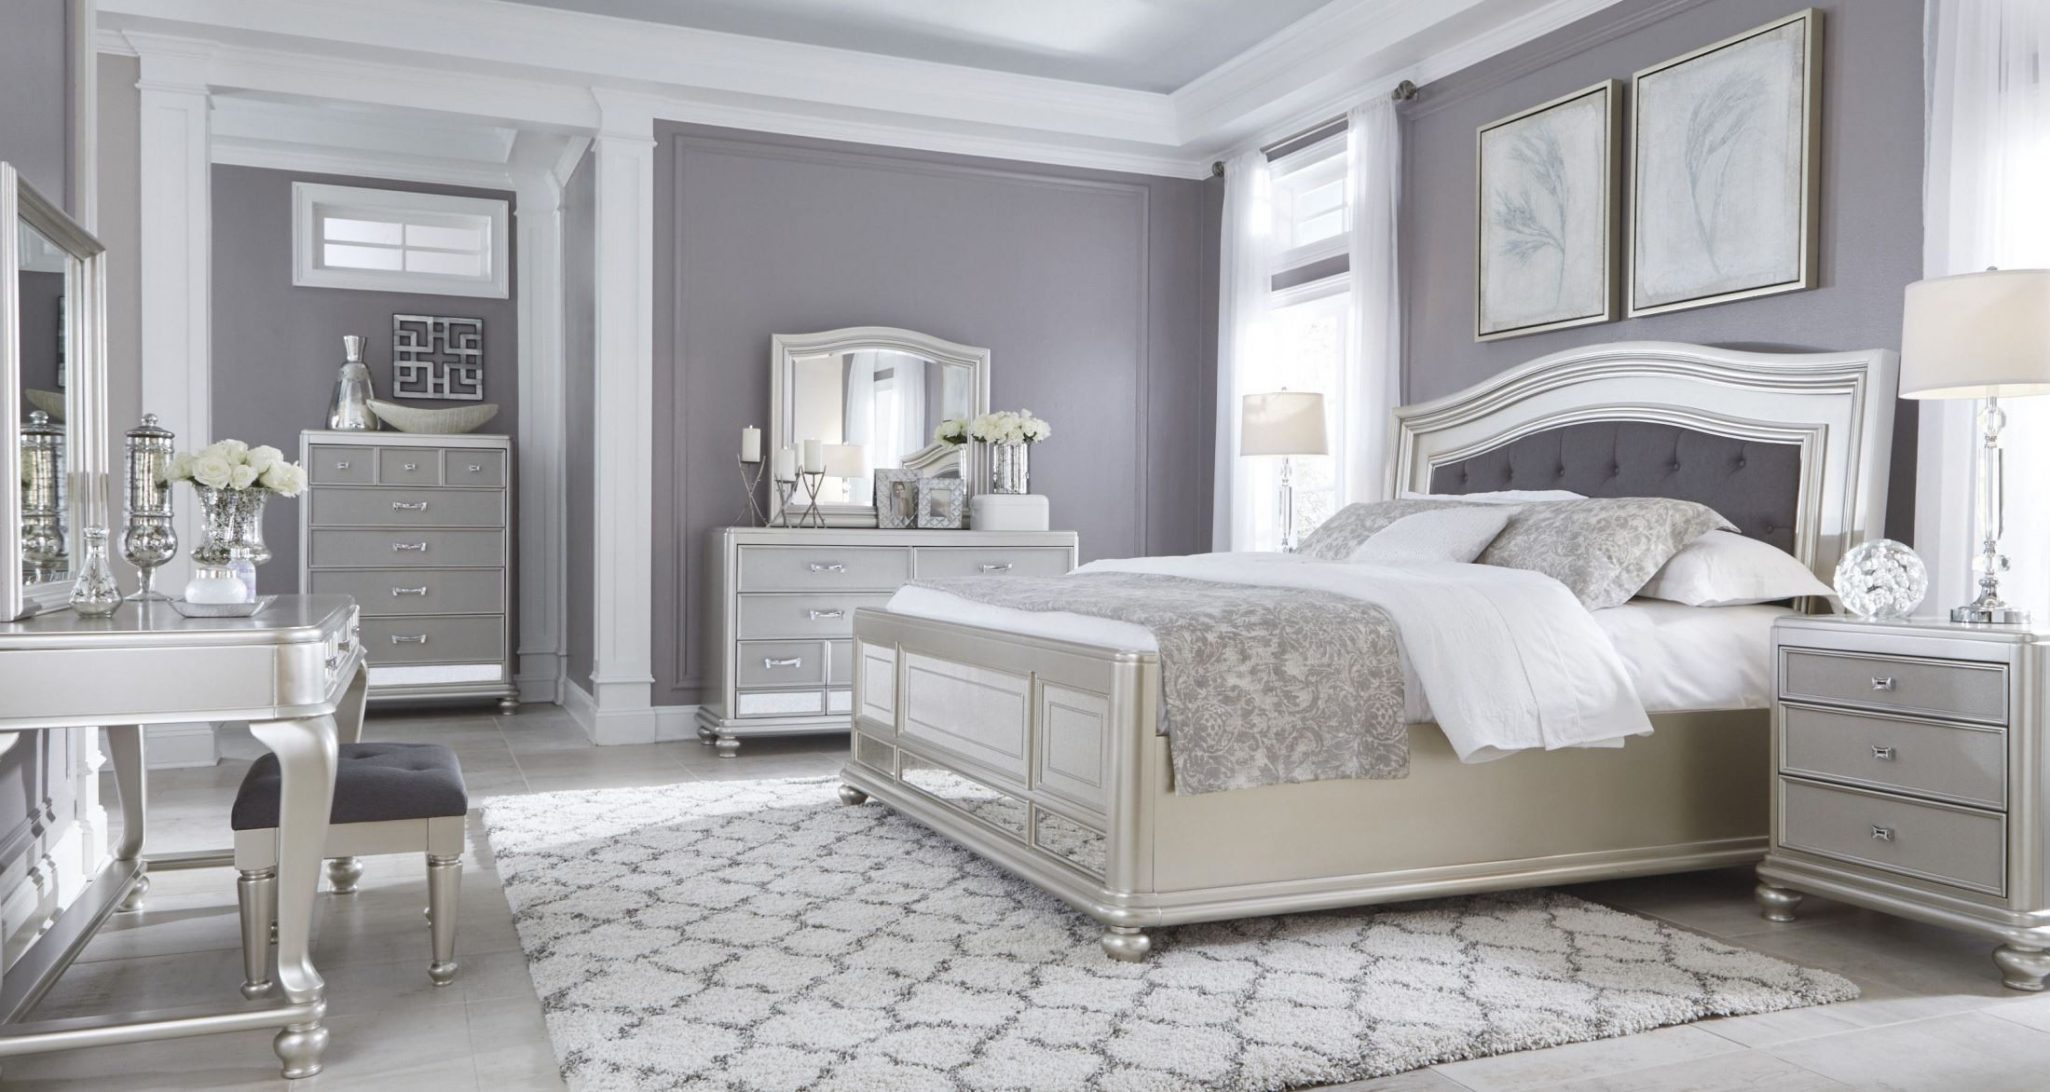 Create and Elegant Guest Room with a Queen Bed + Tips on Details that Matter